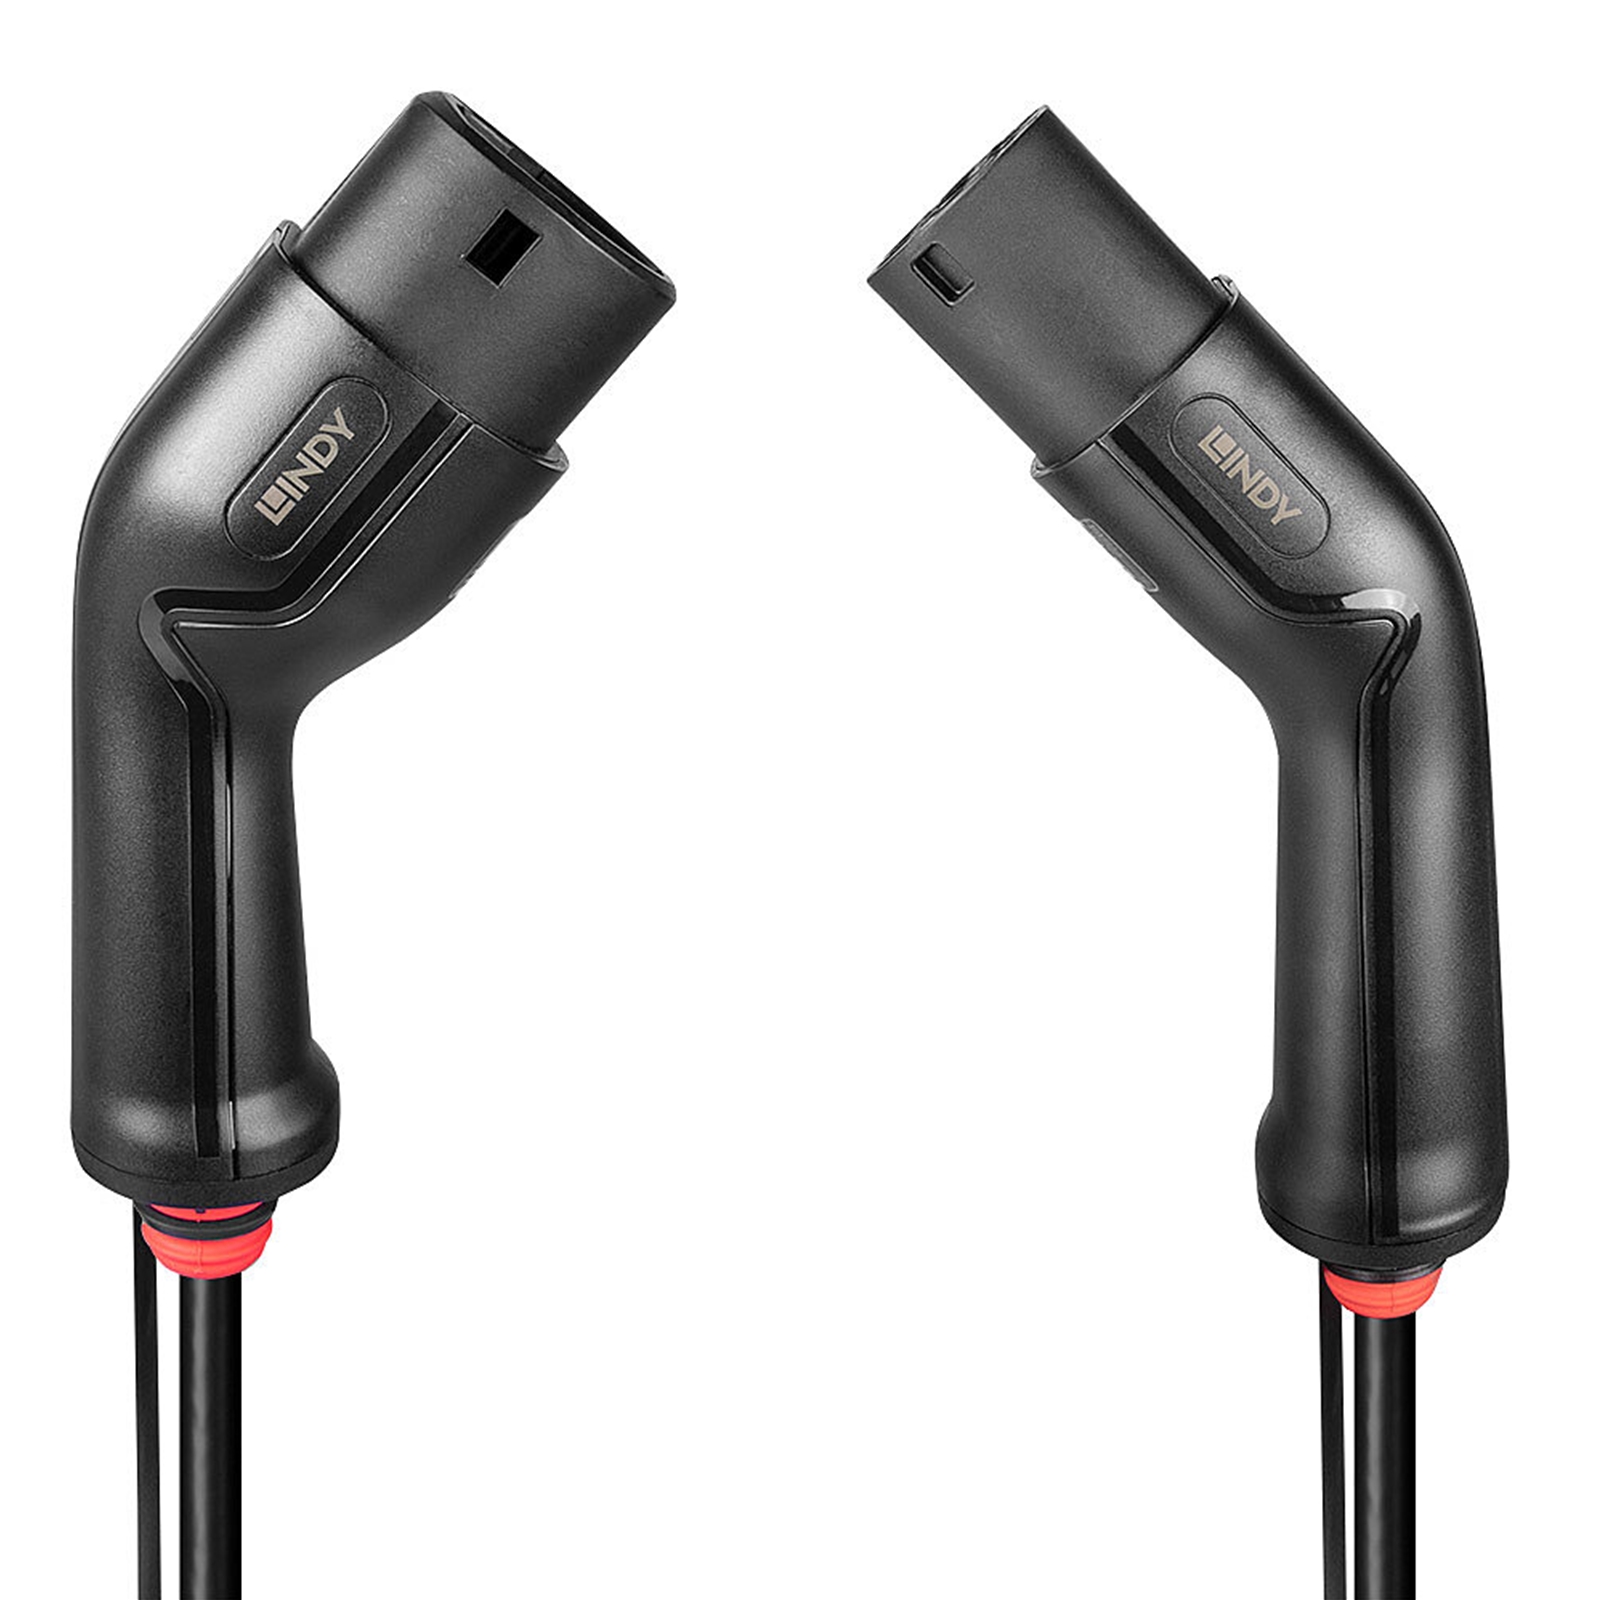 LINDY 30110 5m Type 2 EV-Charging cable, 11kW, 3-phase charging for electric and hybrid vehicles, Supplied with a carrying bag for convenient storage, 2 year warranty